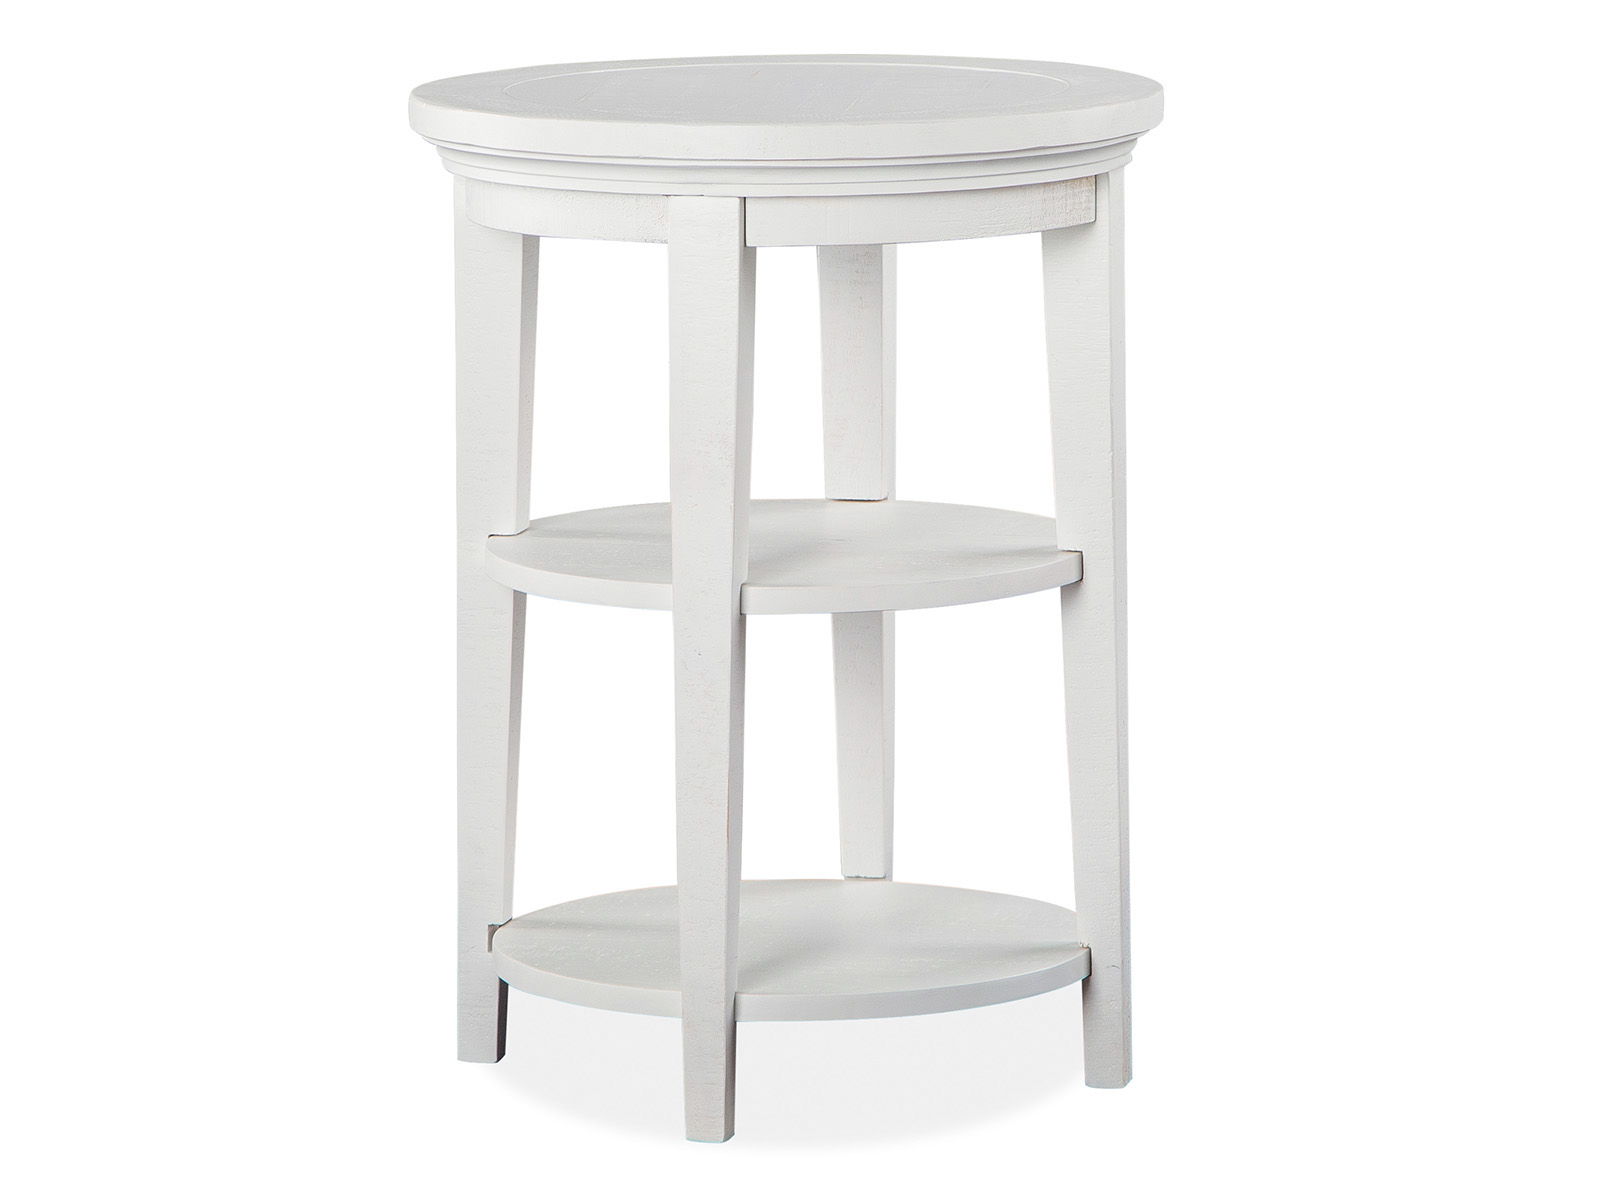 Heron Cove - Round Accent End Table - Chalk White